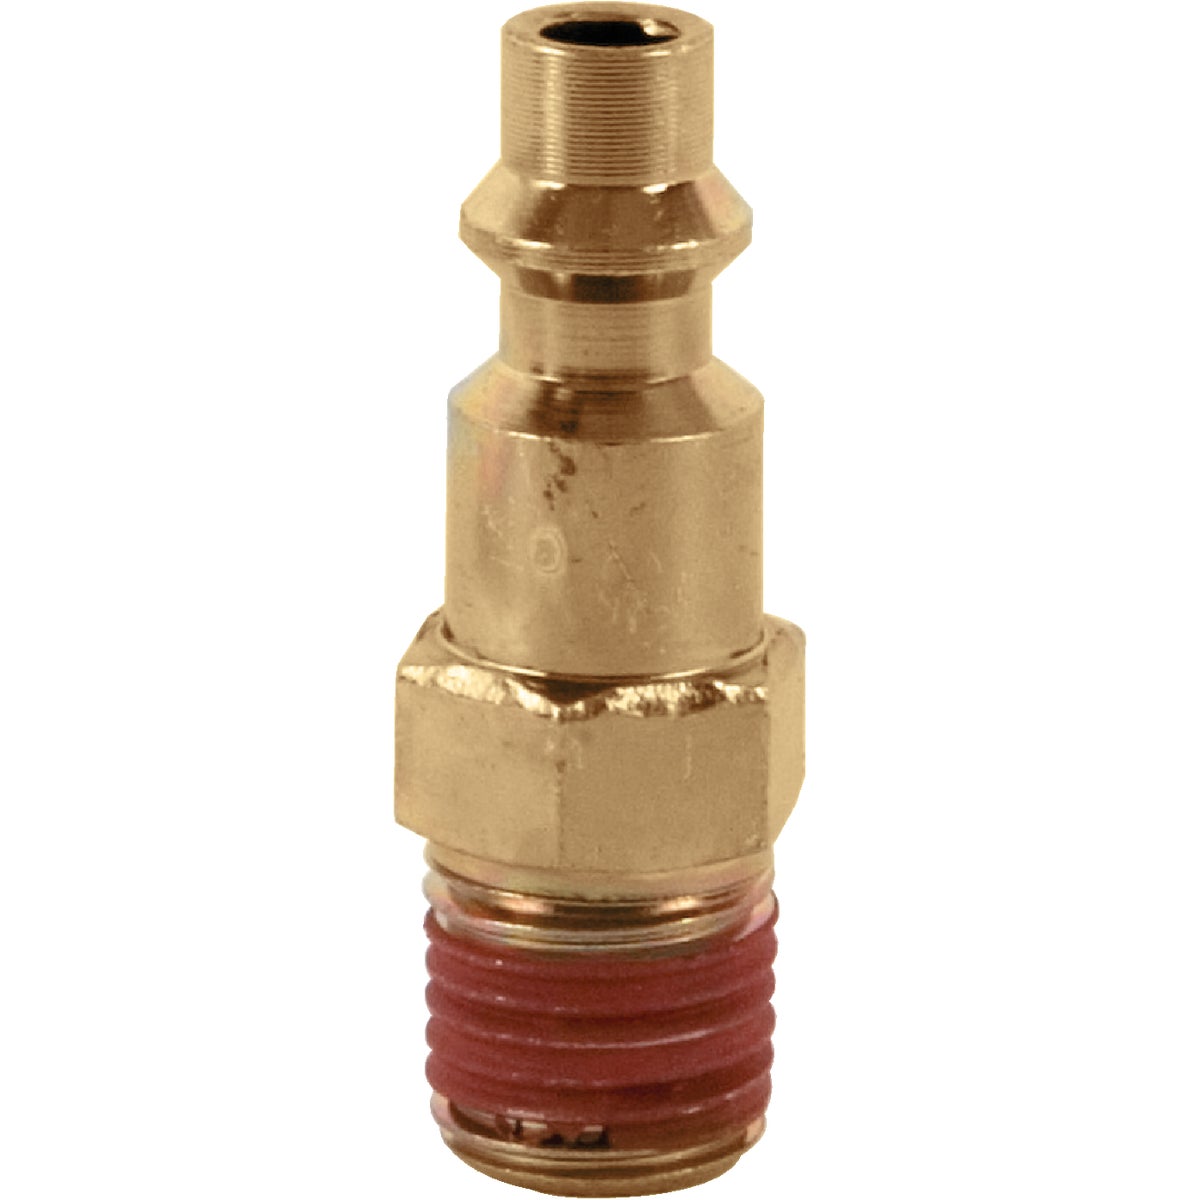 Item 300332, 1/4" NPT (National Pipe Thread) Male thread plug for air compressor and air